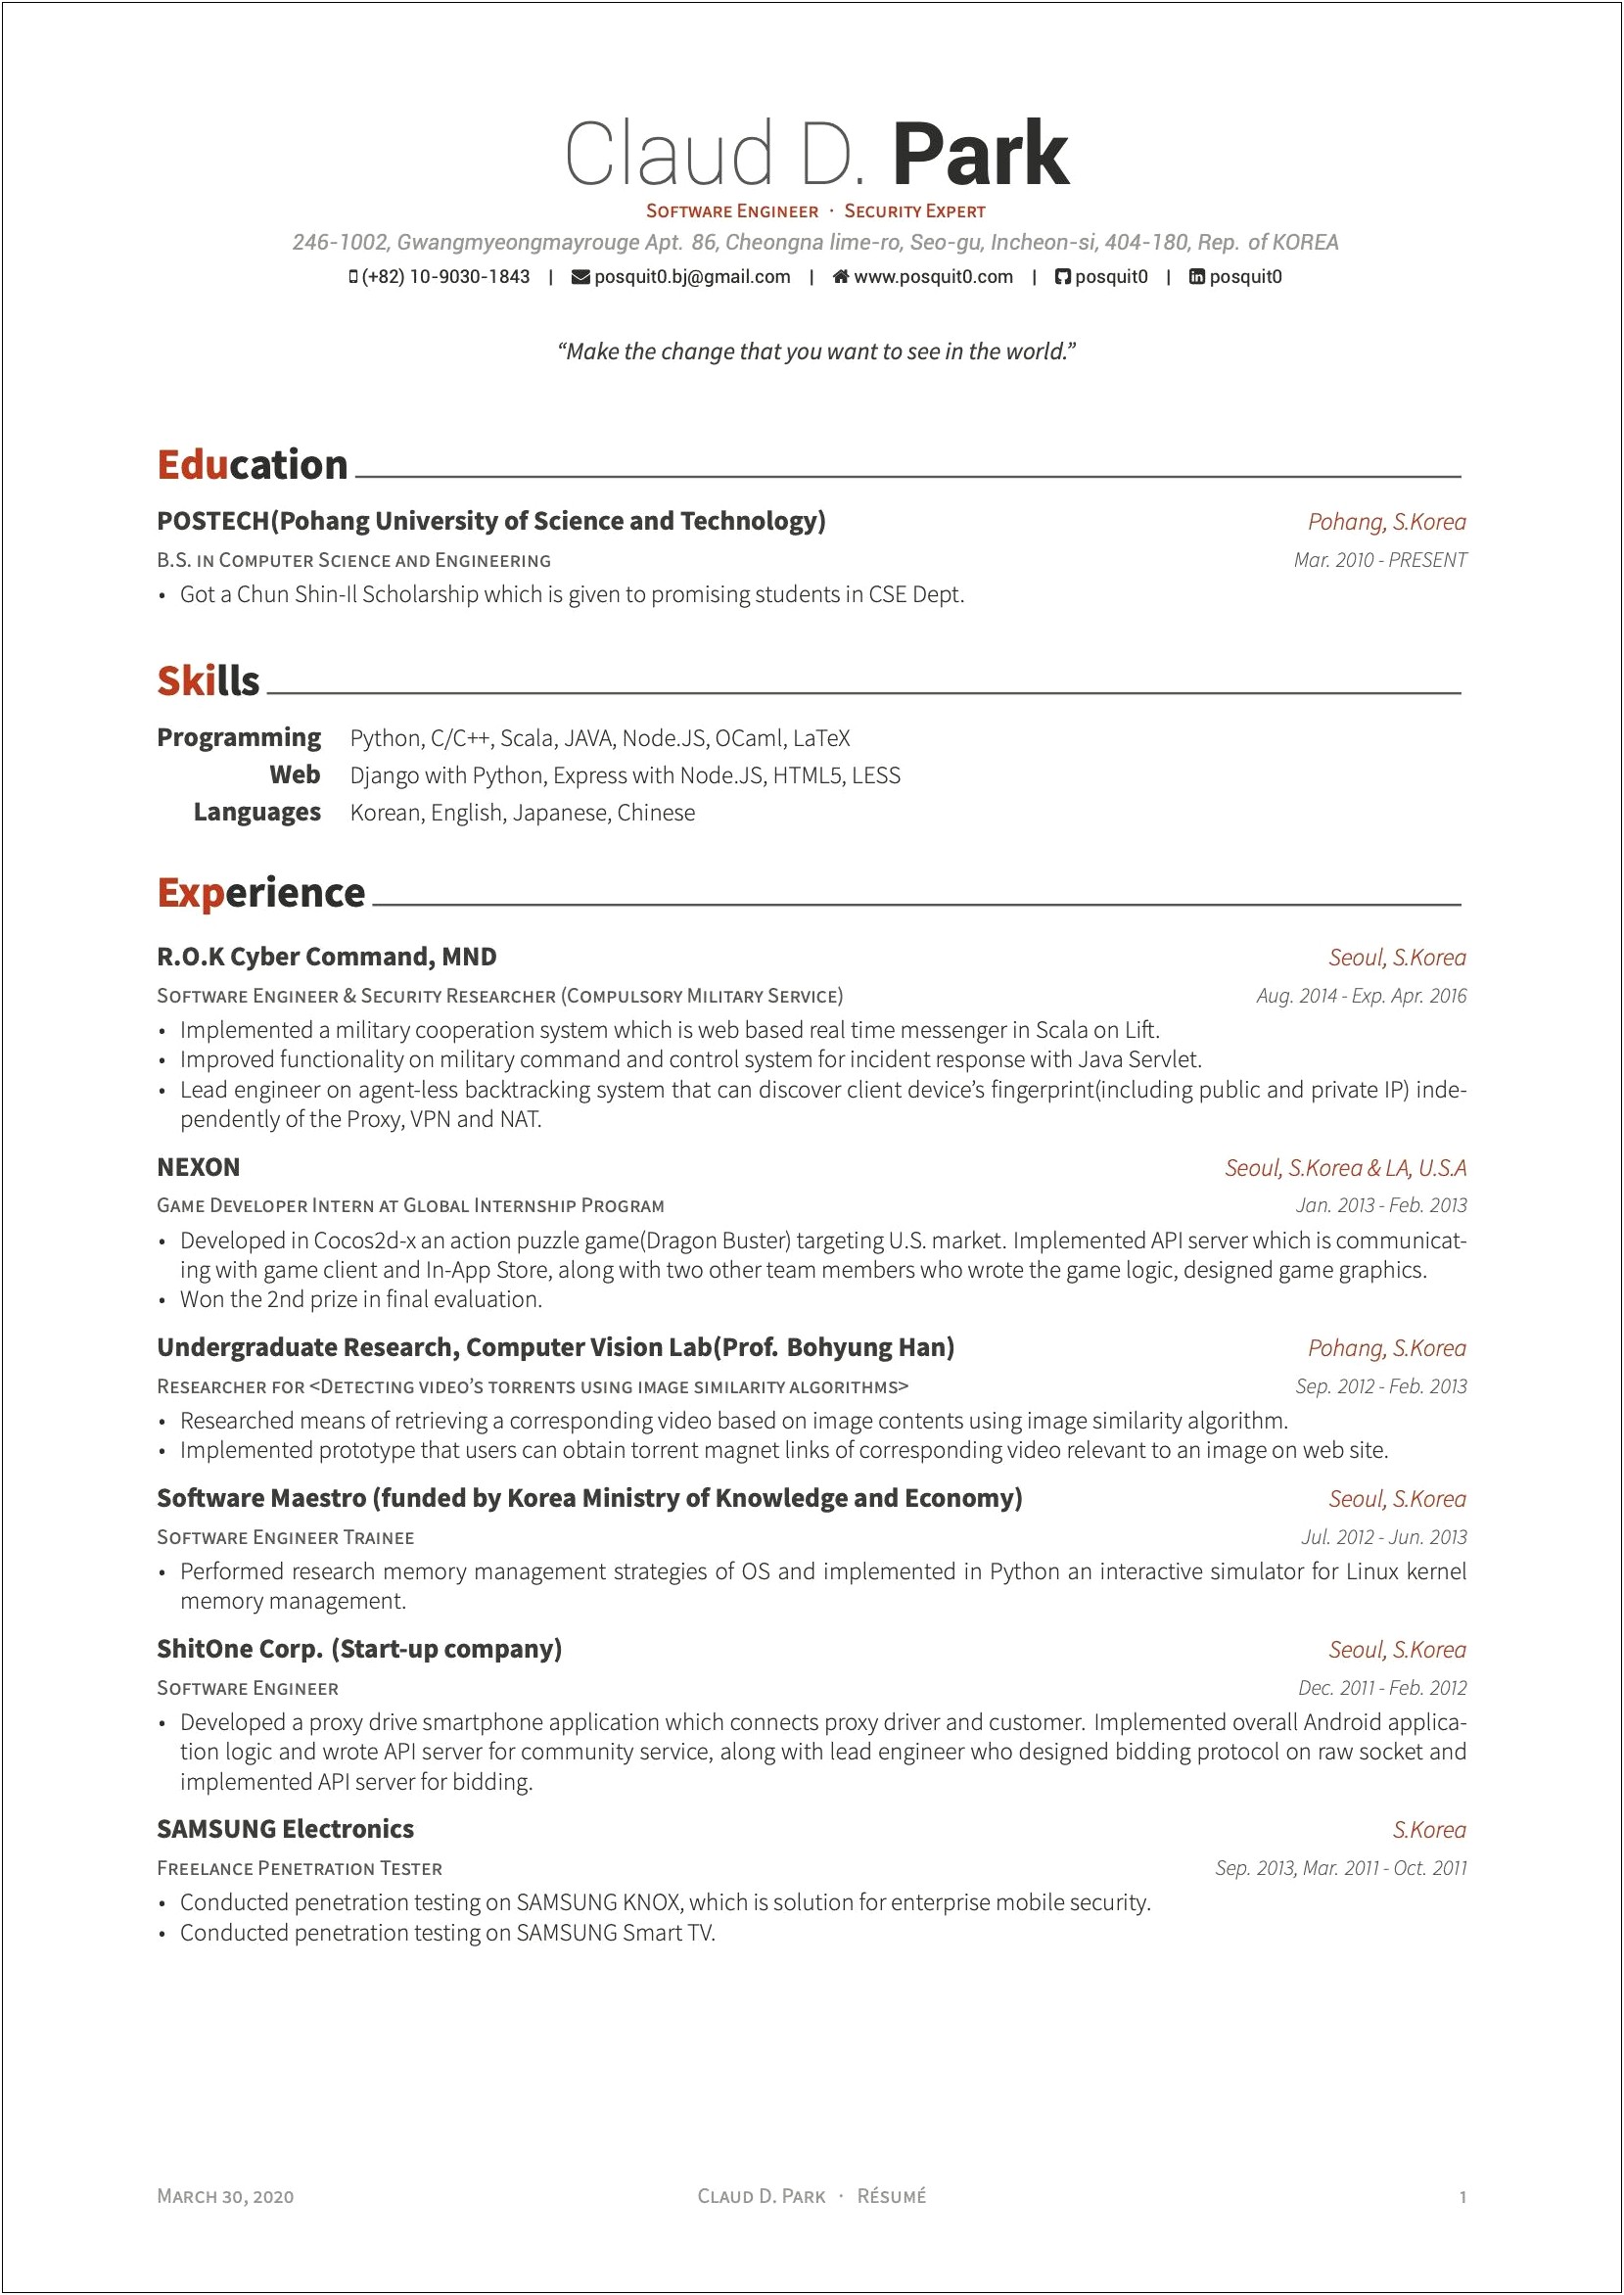 Microsoft Word Resume Dates On Right Side